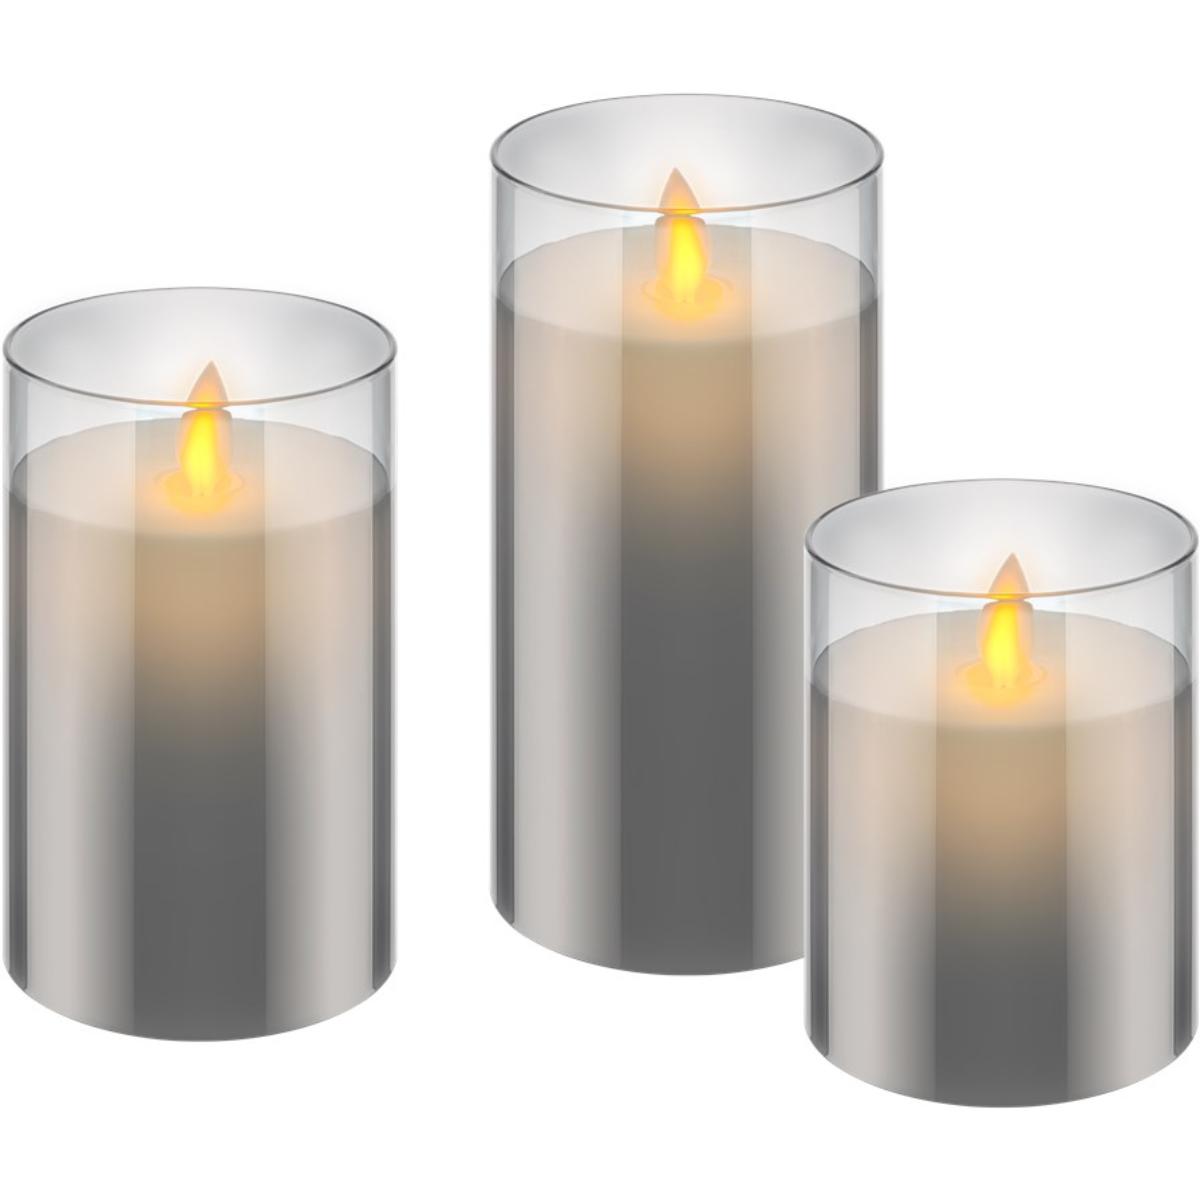 Set of 3 LED real wax candles in glass Beautiful and safe lighting solu